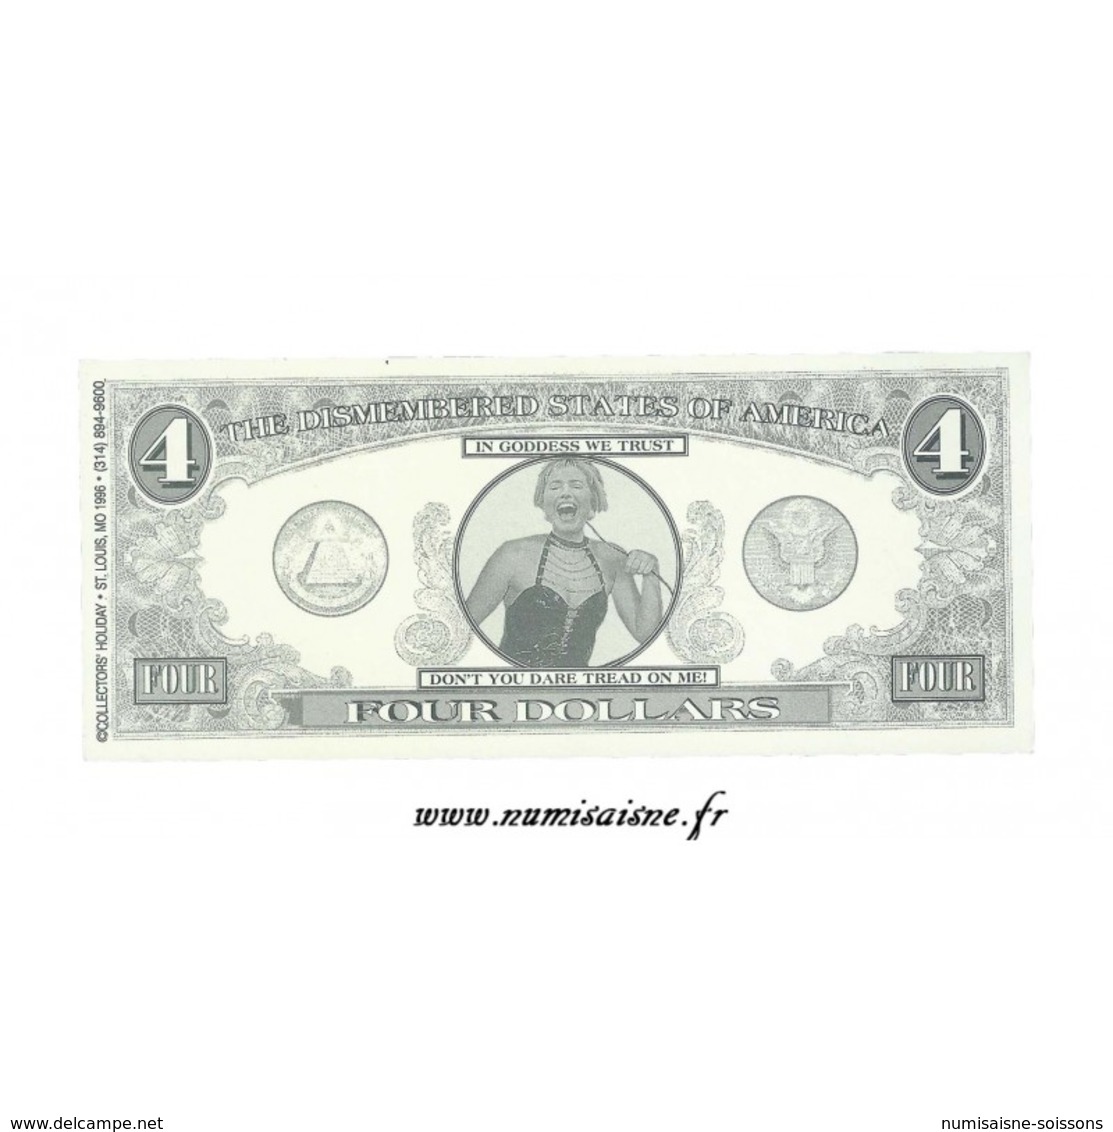 ÉTATS UNIS - 4 DOLLARS 1996 - THE DISMENBERED STATES OF AMERICA - BILLET FANTAISIE - - Unclassified